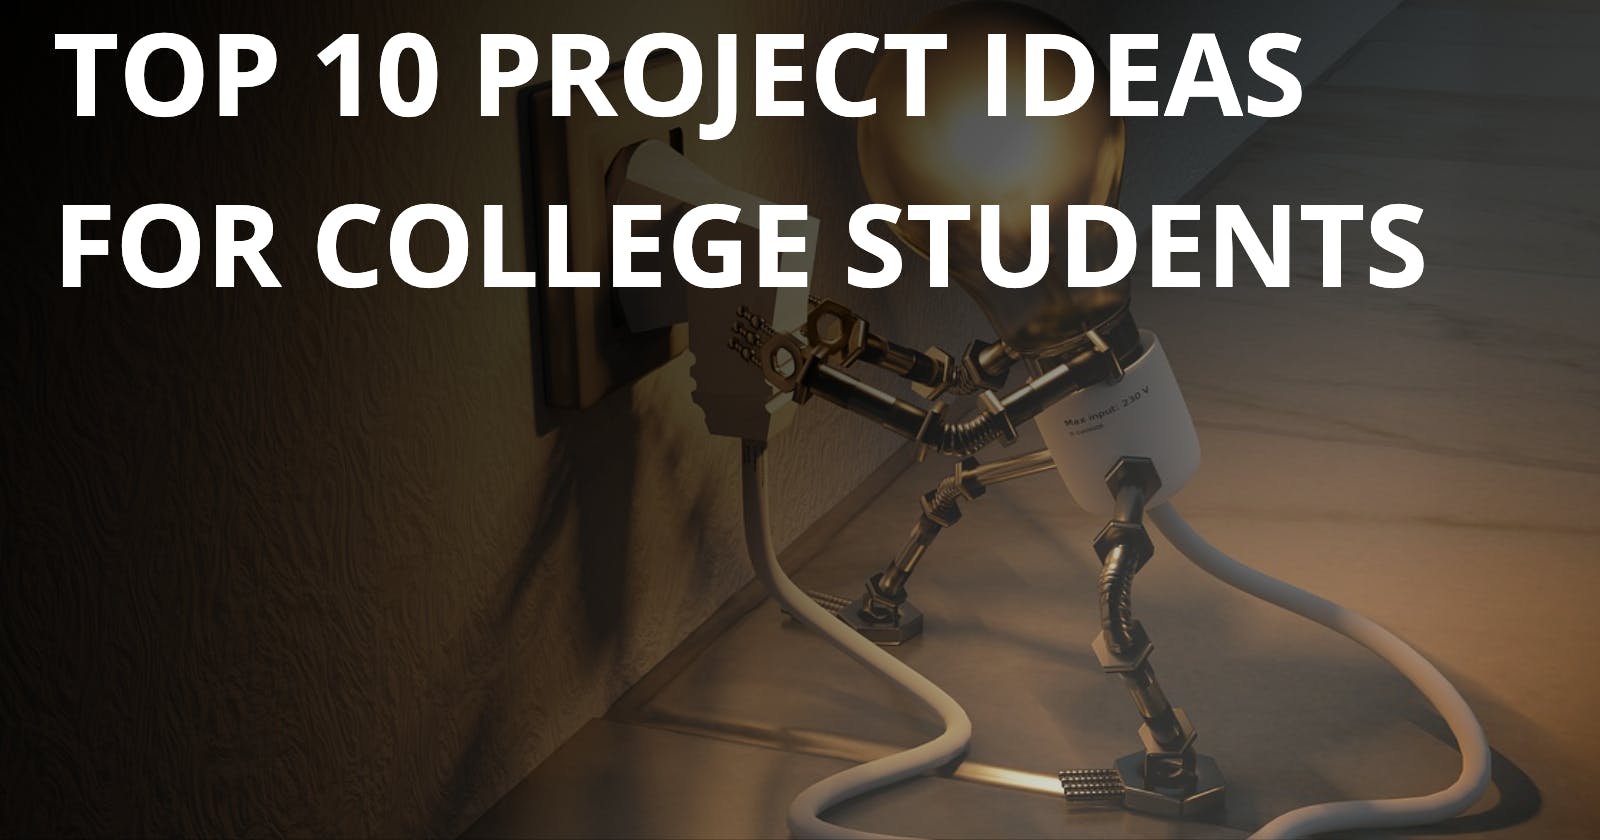 Top 10 Project Ideas for College Students